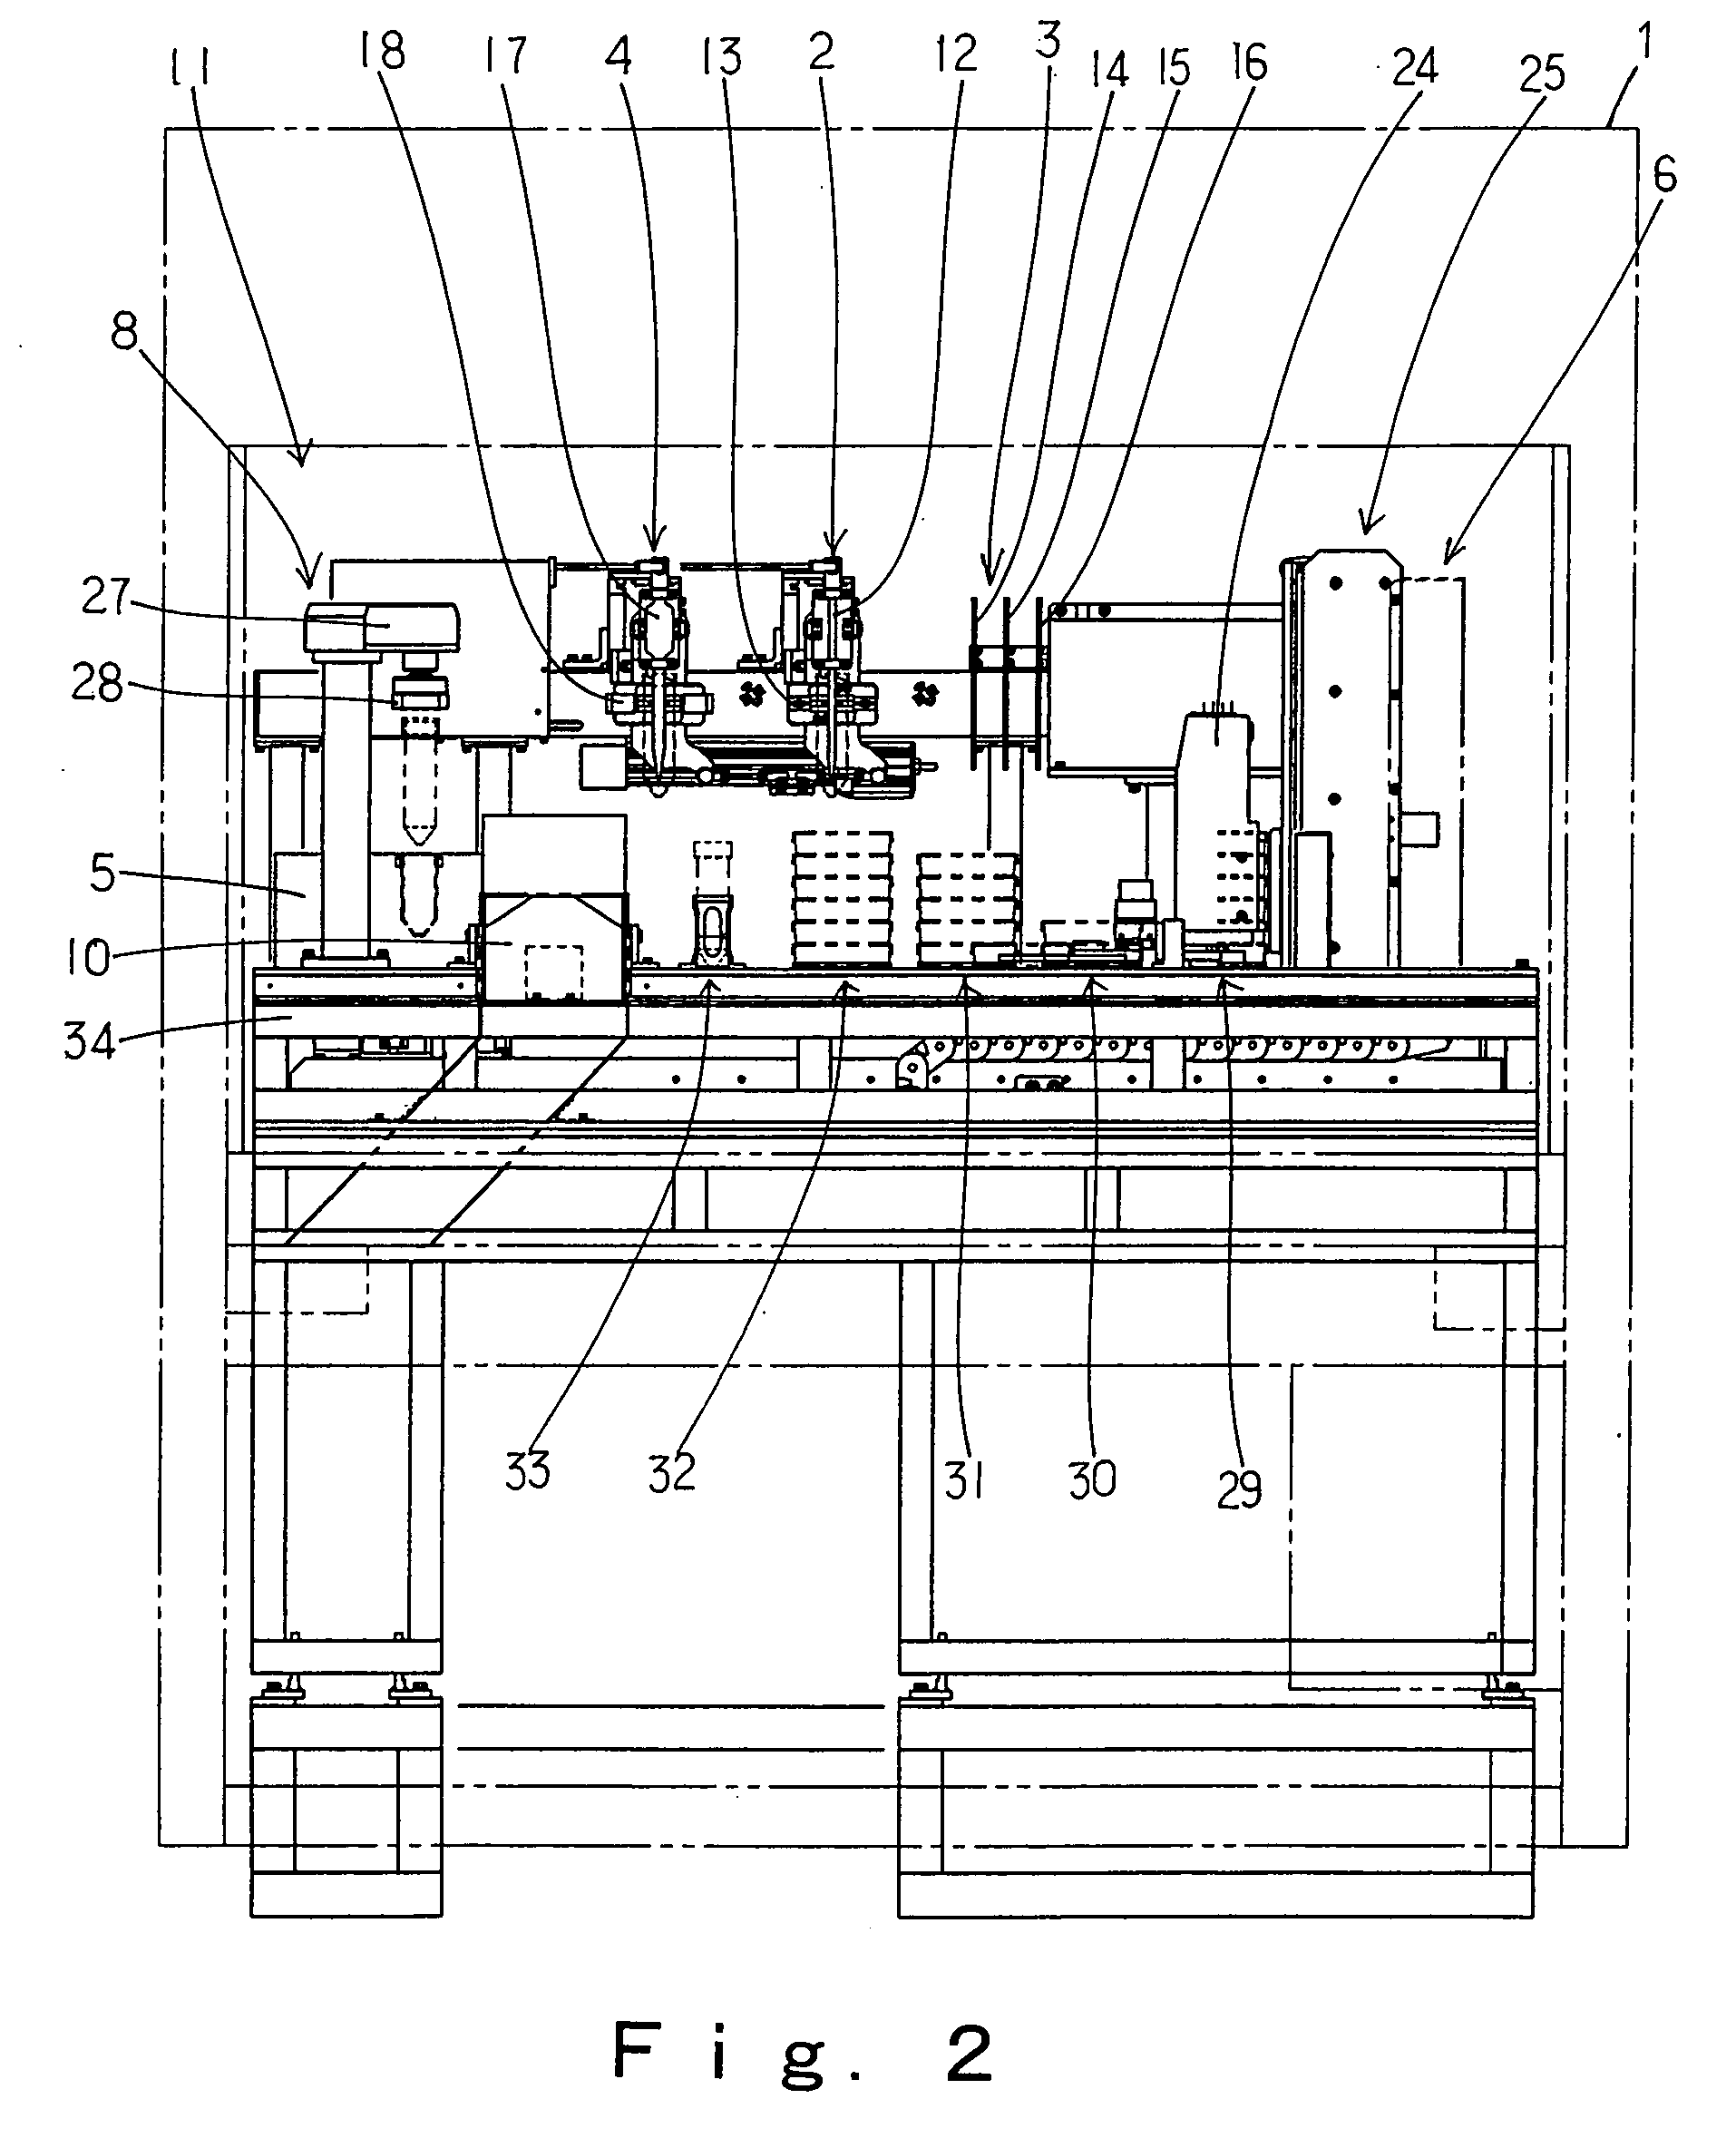 Apparatus for cell culture